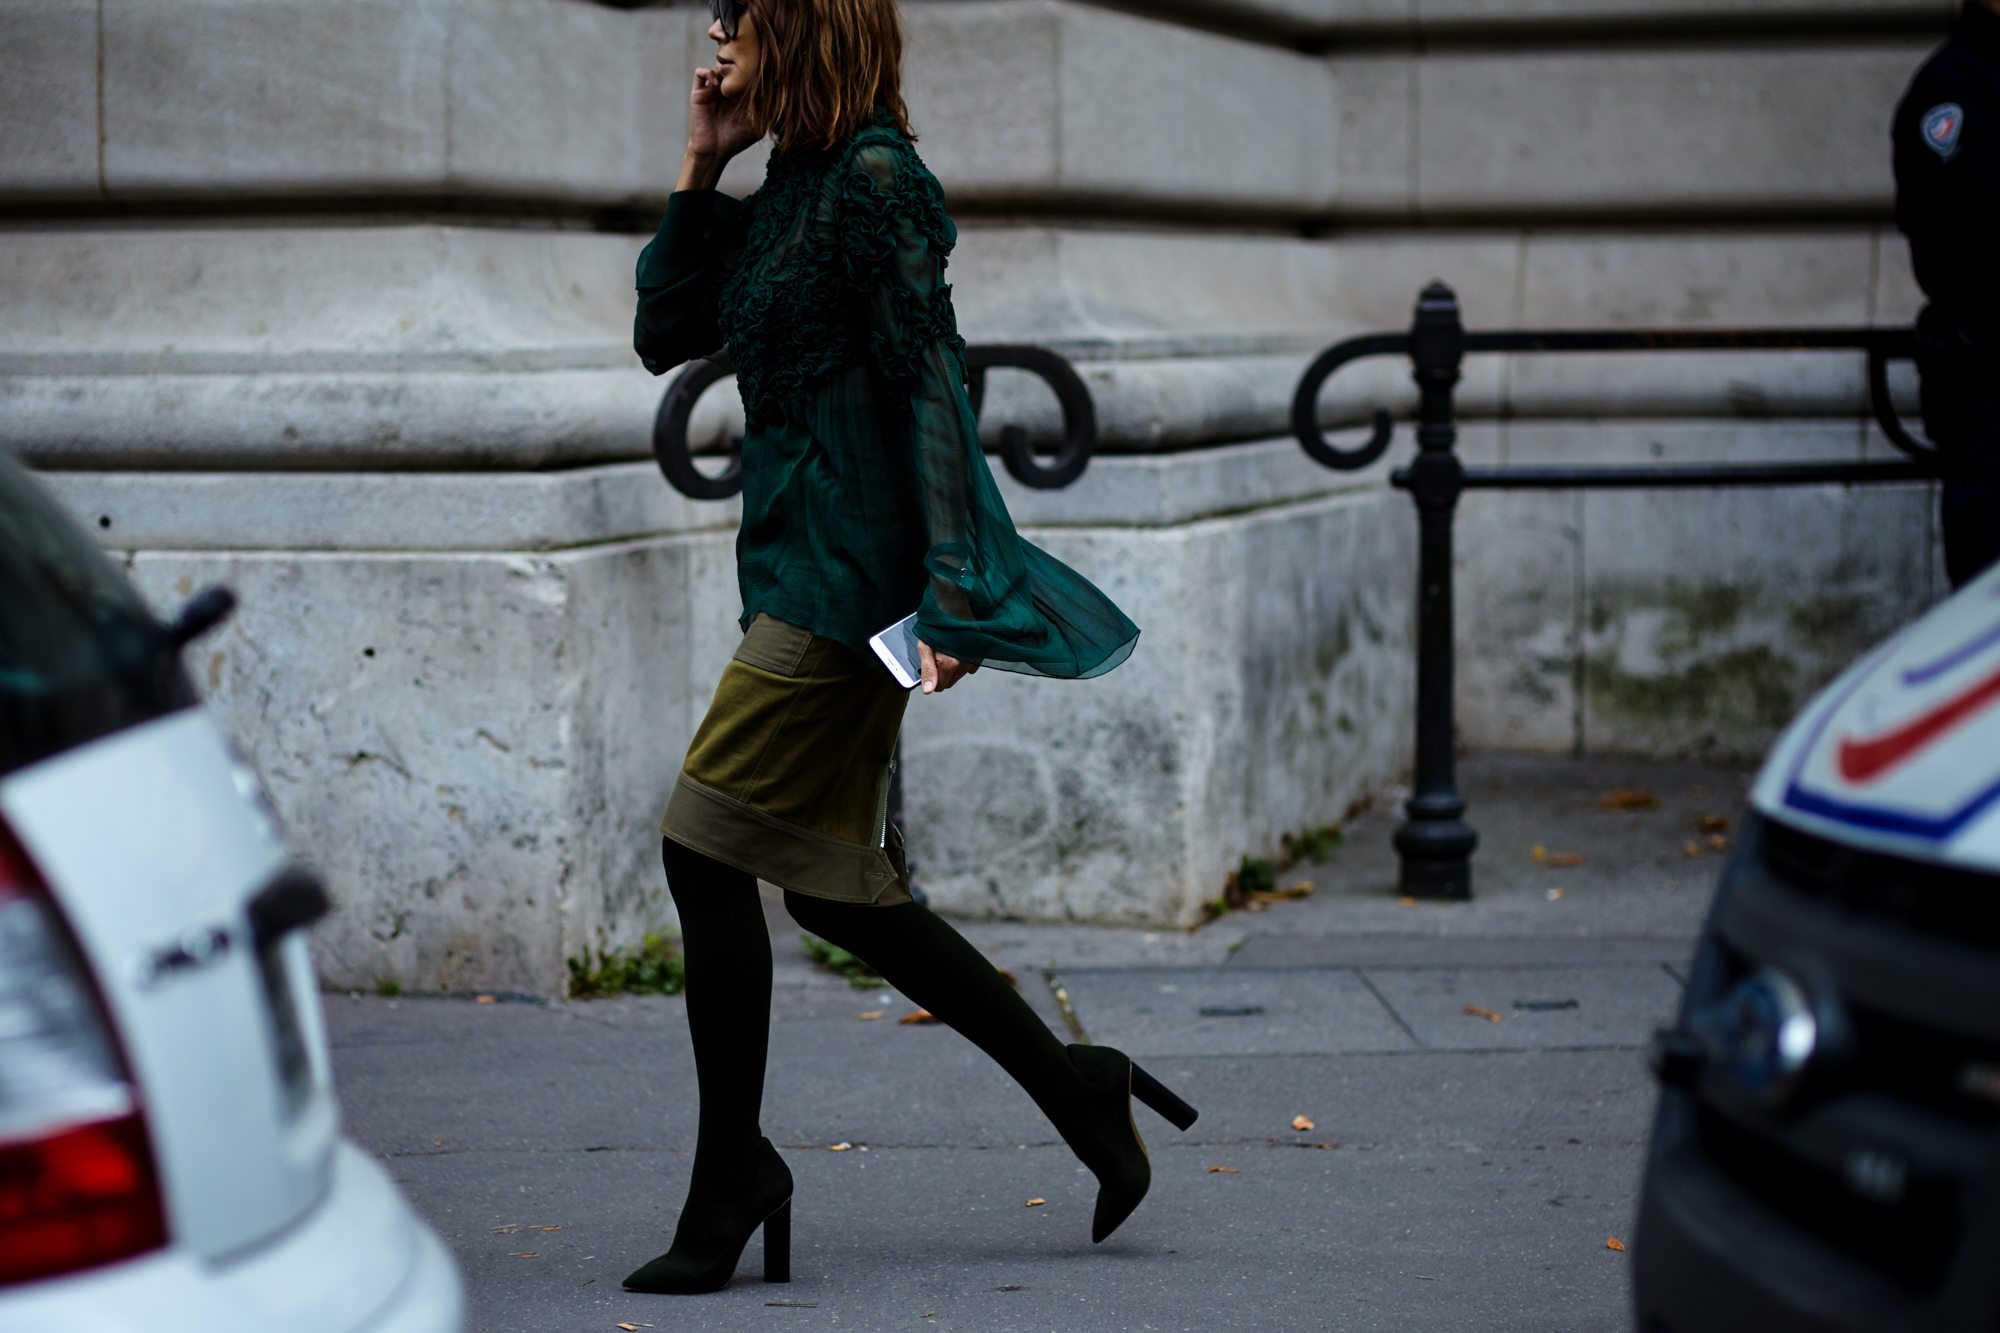 PFW Spring-Summer 2017 Street Style: Christine Centenera wearing a green outfit and over the knee boots before the Chloe fashion show in Paris, France